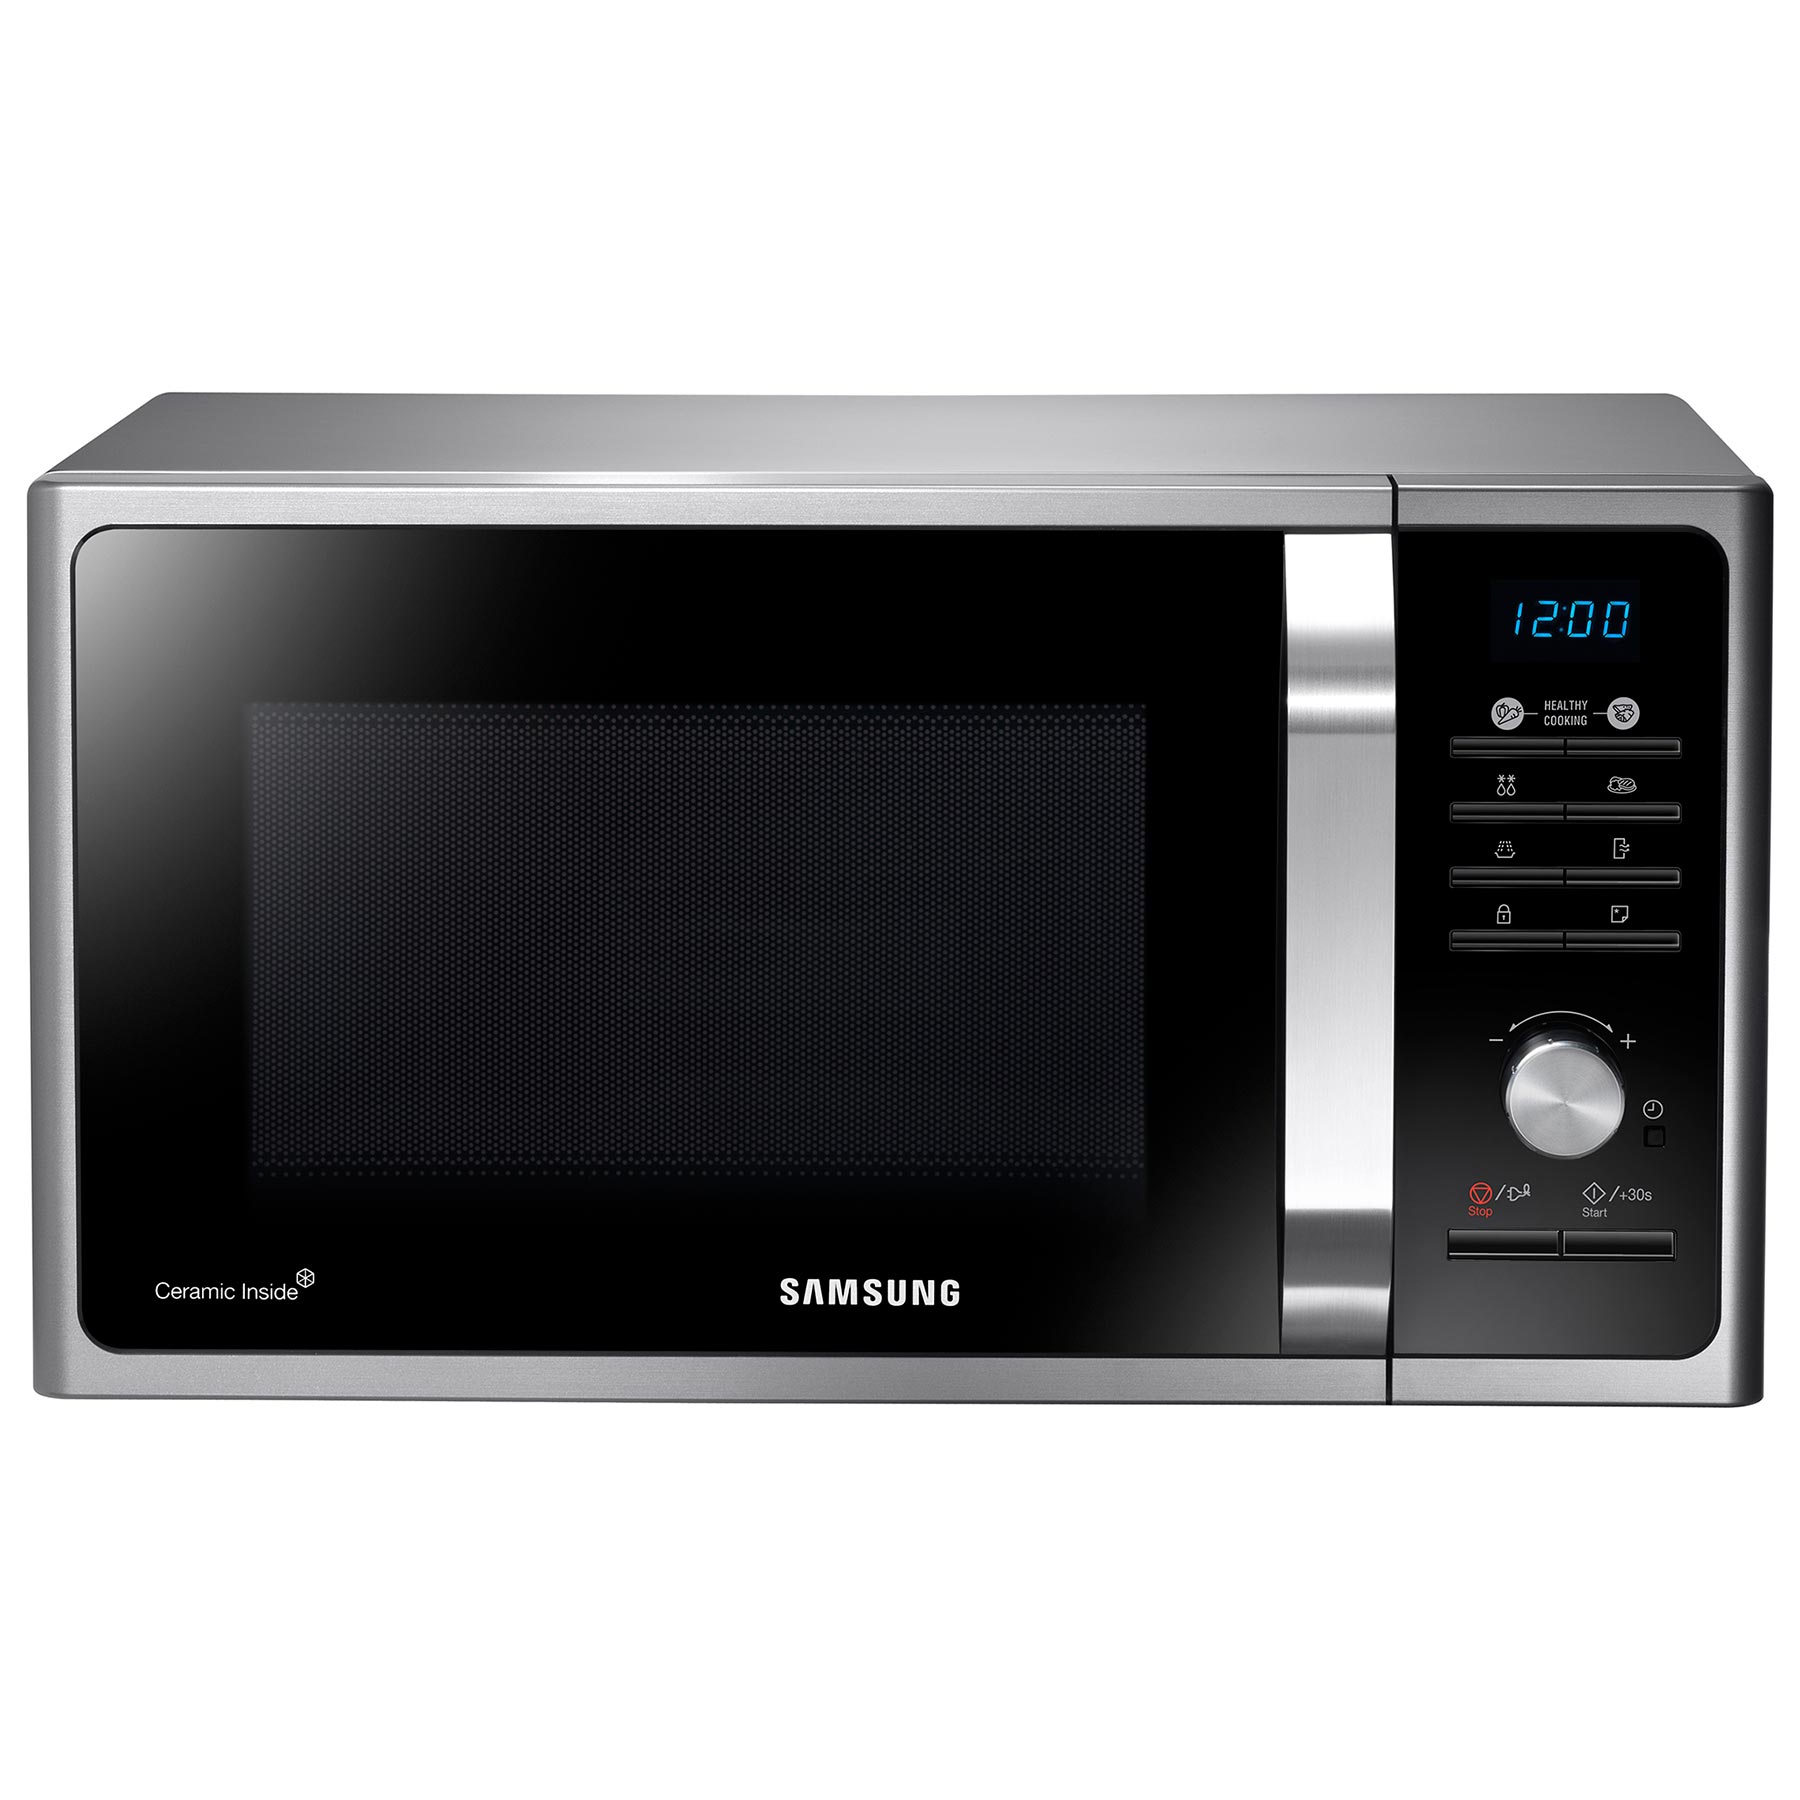 Samsung MS23F301TAS Microwave Oven in Silver Tact 23 Litre 800W